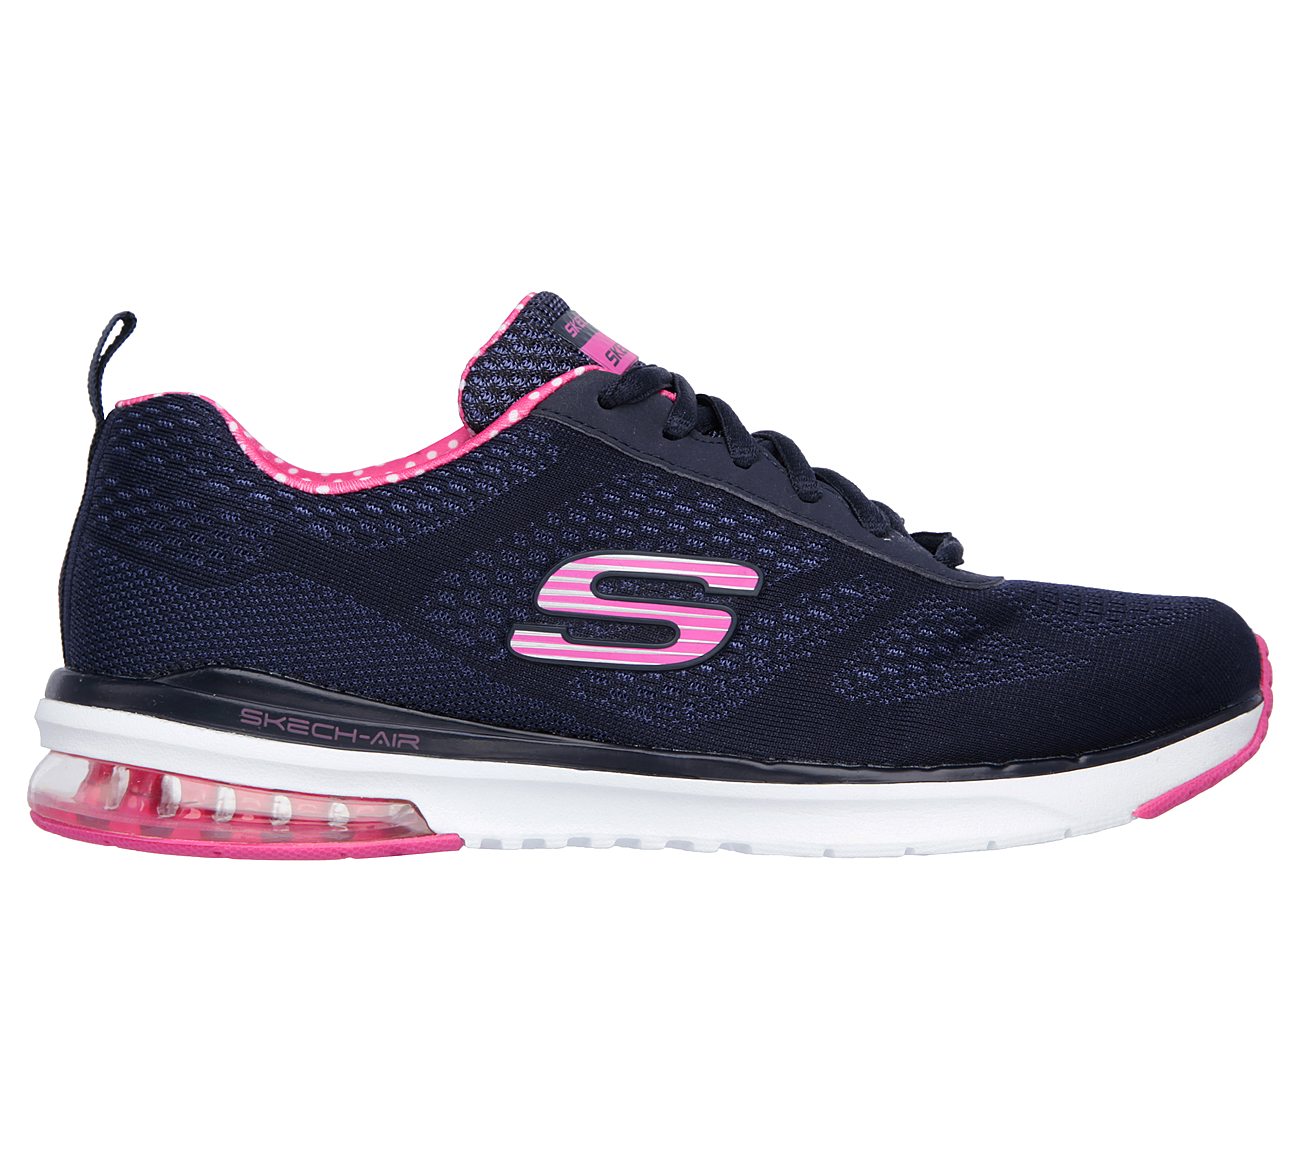 skechers women's air infinity athletic sports workout sneakers